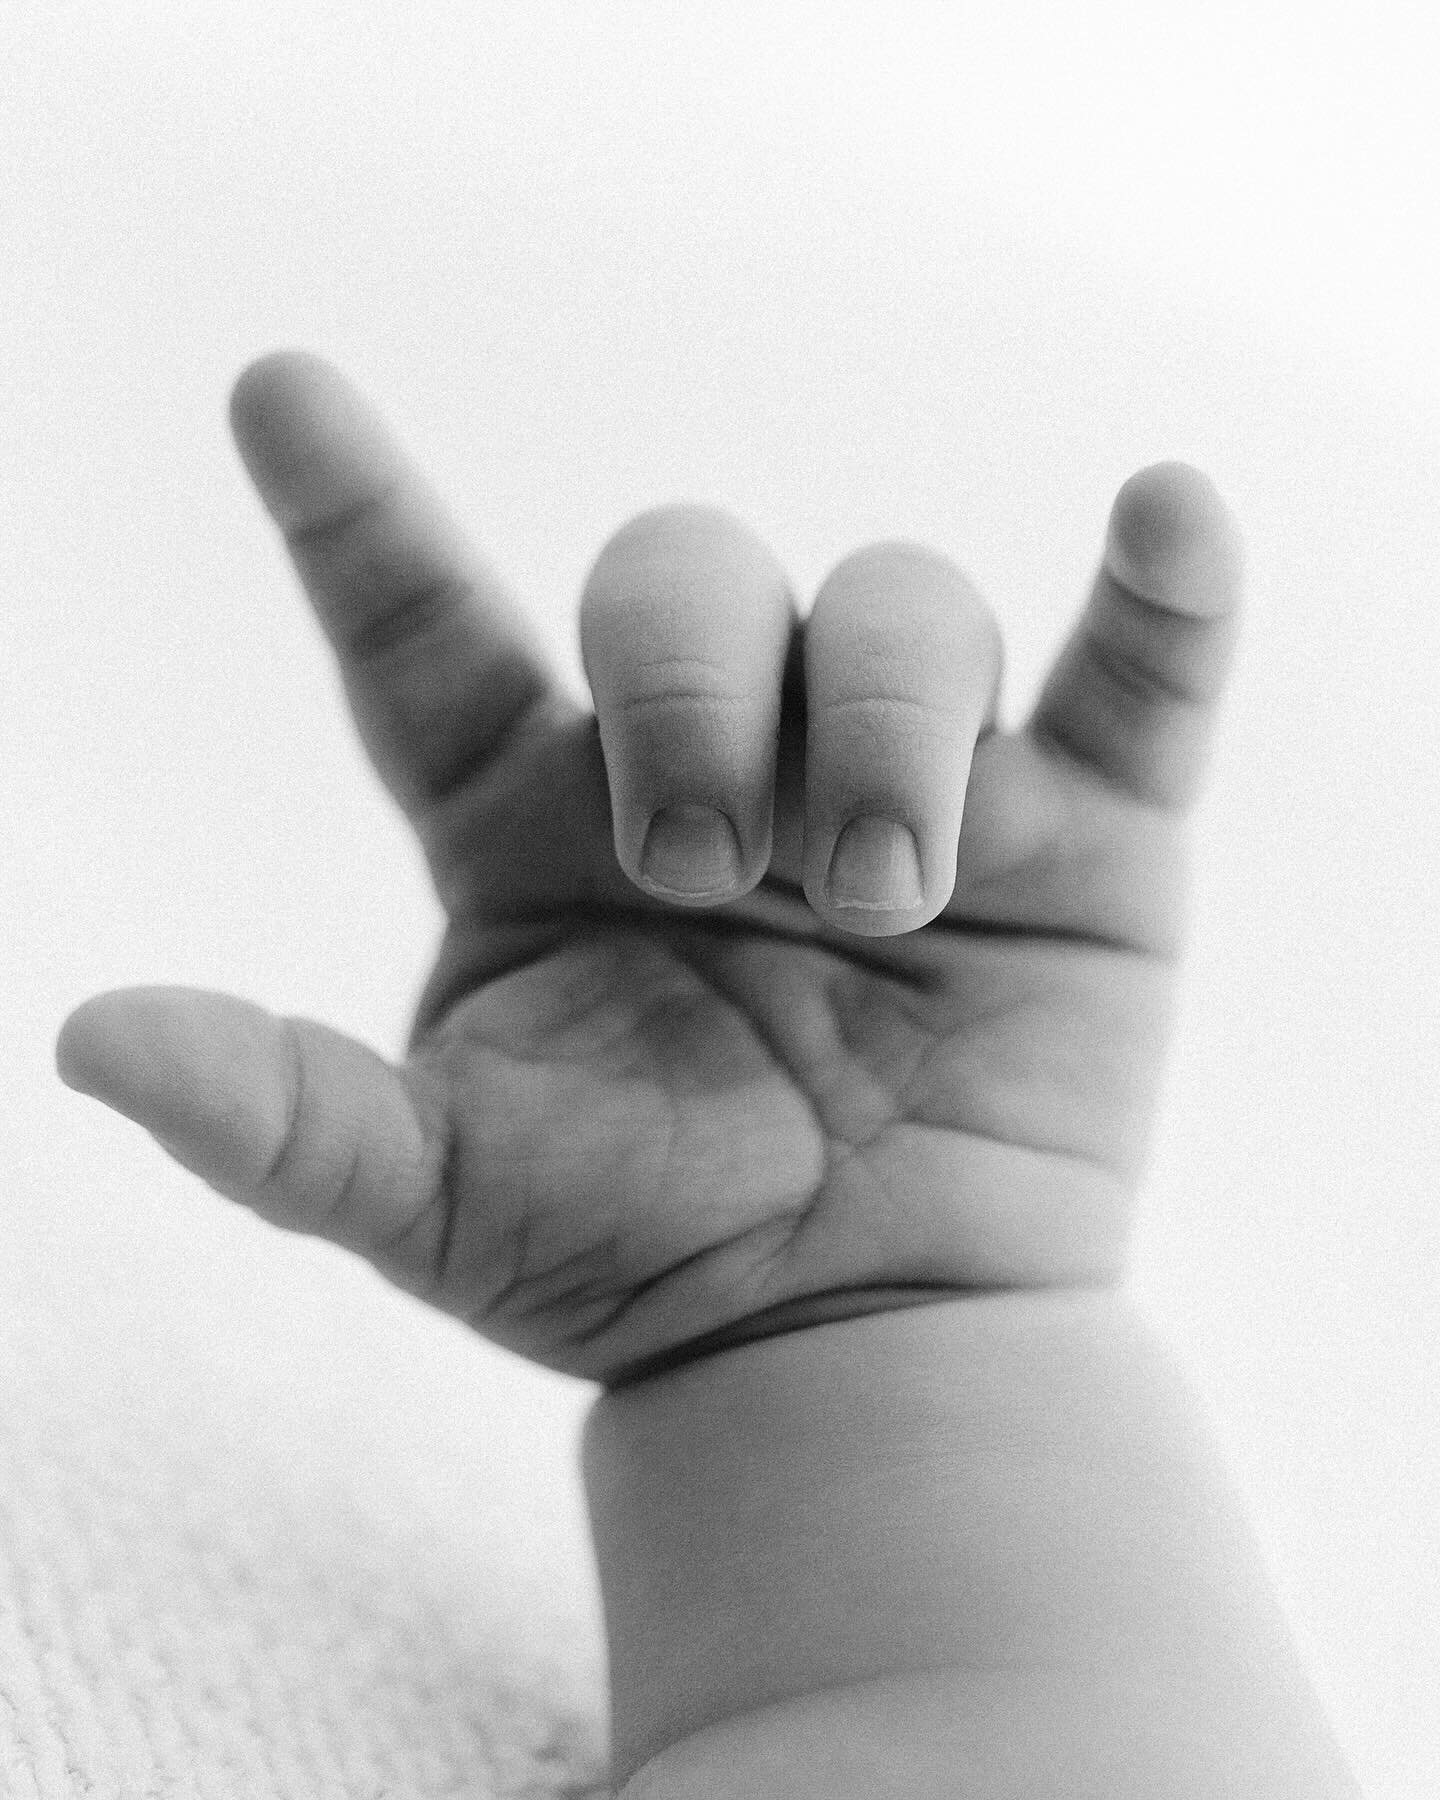 when baby has been practicing their ASL. 🤟🏻💘
&bull;
&bull;
&bull;
#newborn #baby #postpartum #4thtrimester #lifestylephotography #newbornphotography #babyphotography #lookslikefilm #thatsdarling  #folkportraits #portraitcollective #makeportraits #